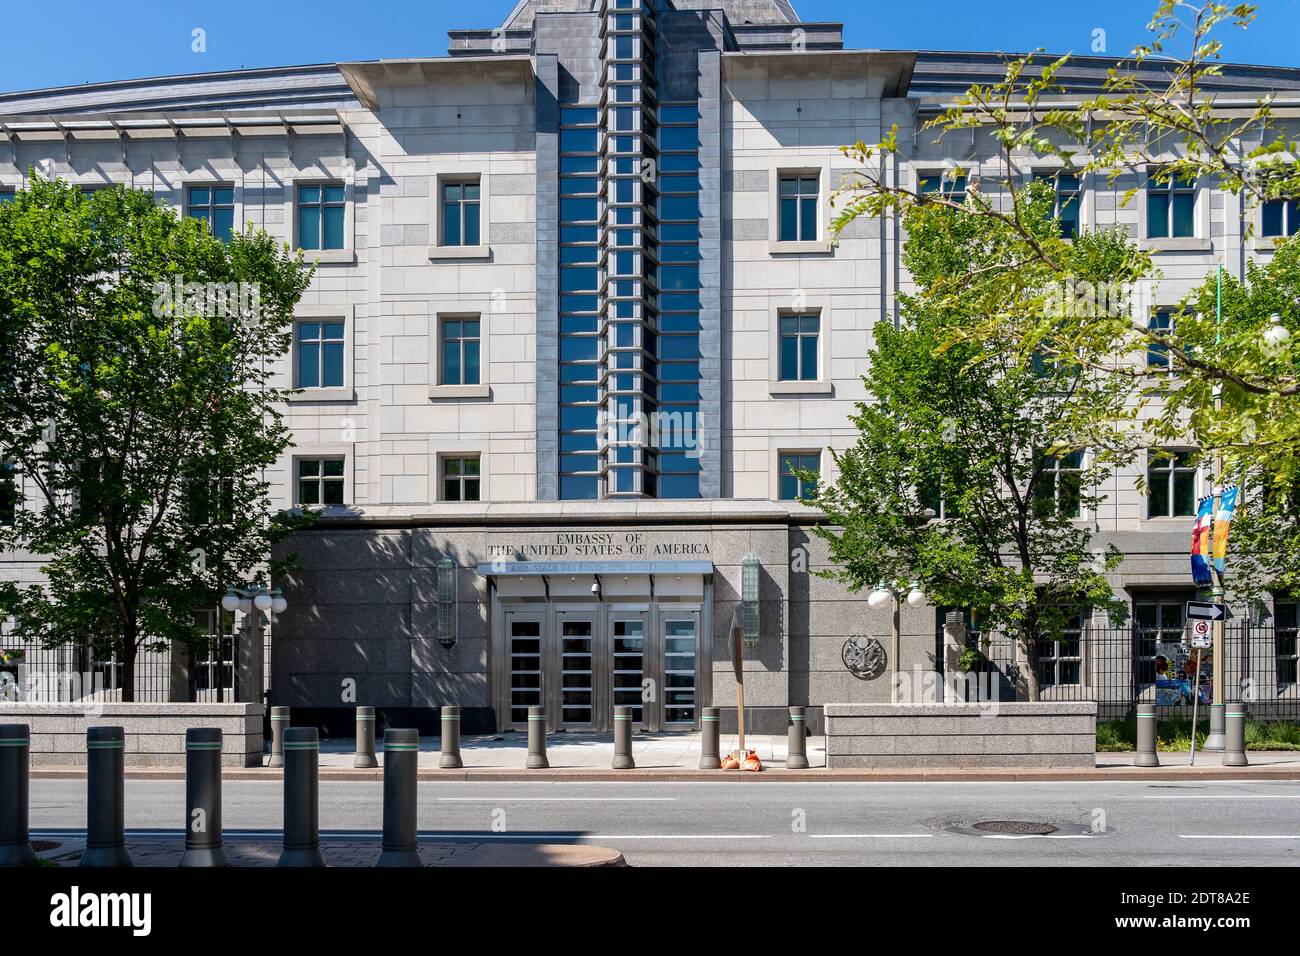 The Embassy of the United States of America building is shown in Ottawa, Canada Stock Photo